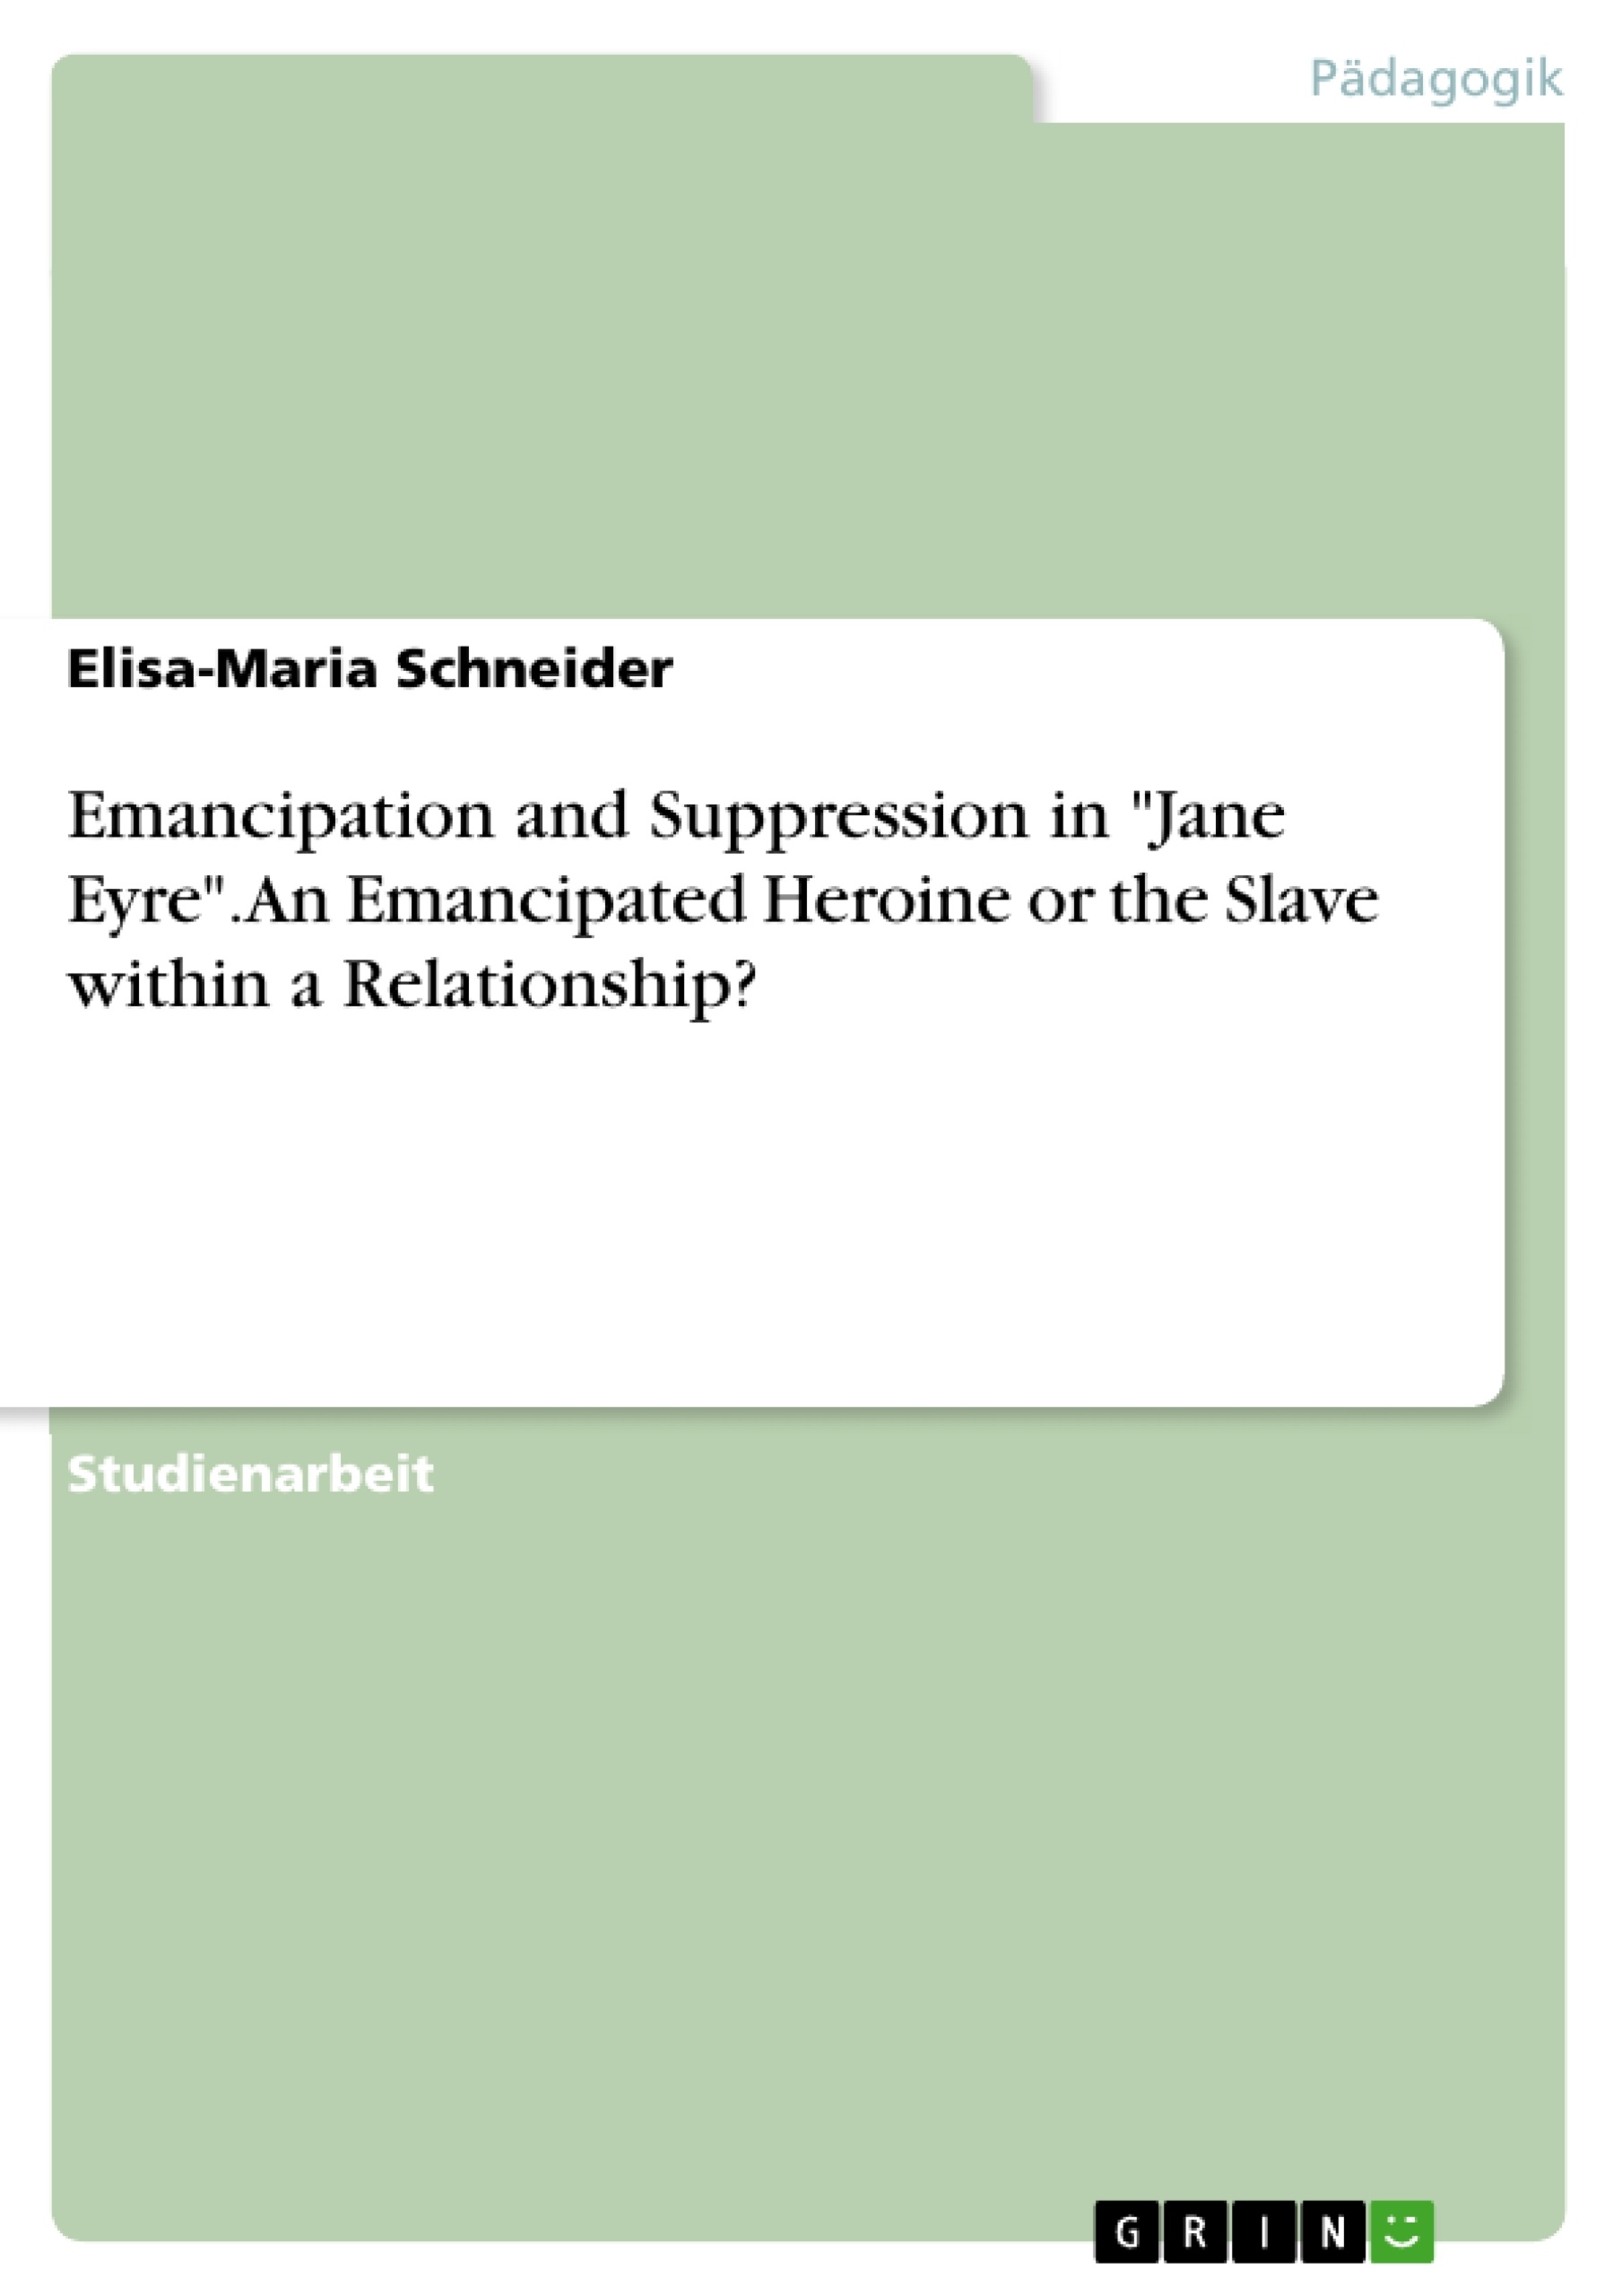 Título: Emancipation and Suppression in "Jane Eyre". An Emancipated Heroine or the Slave within a Relationship?